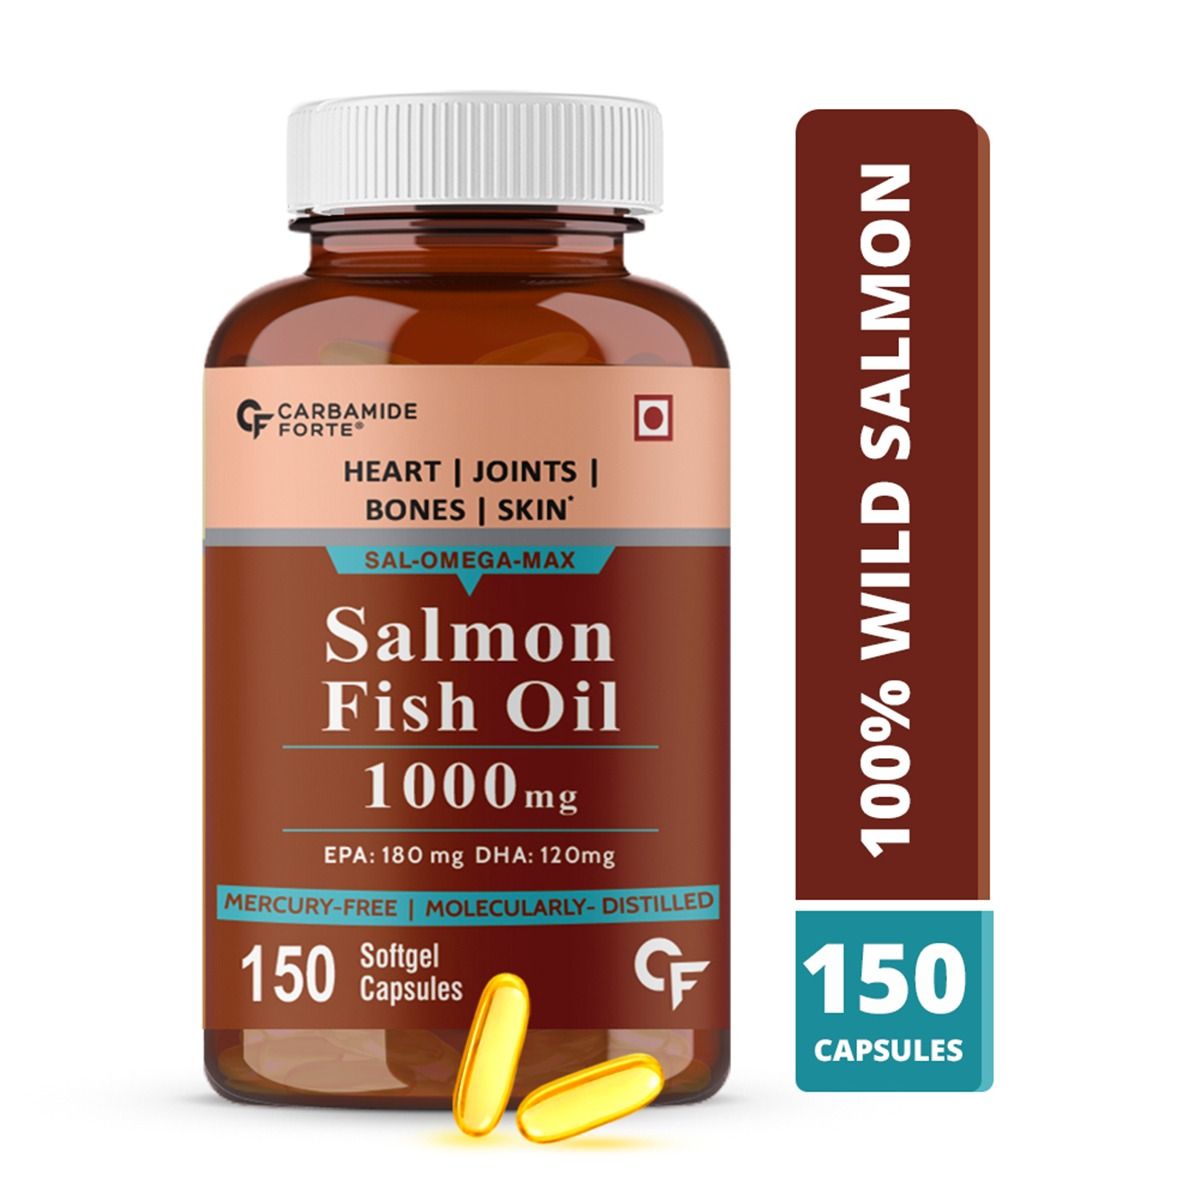 Buy Carbamide Forte Salmon Fish Oil 1000mg Softgel Capsules, 150 Count Online